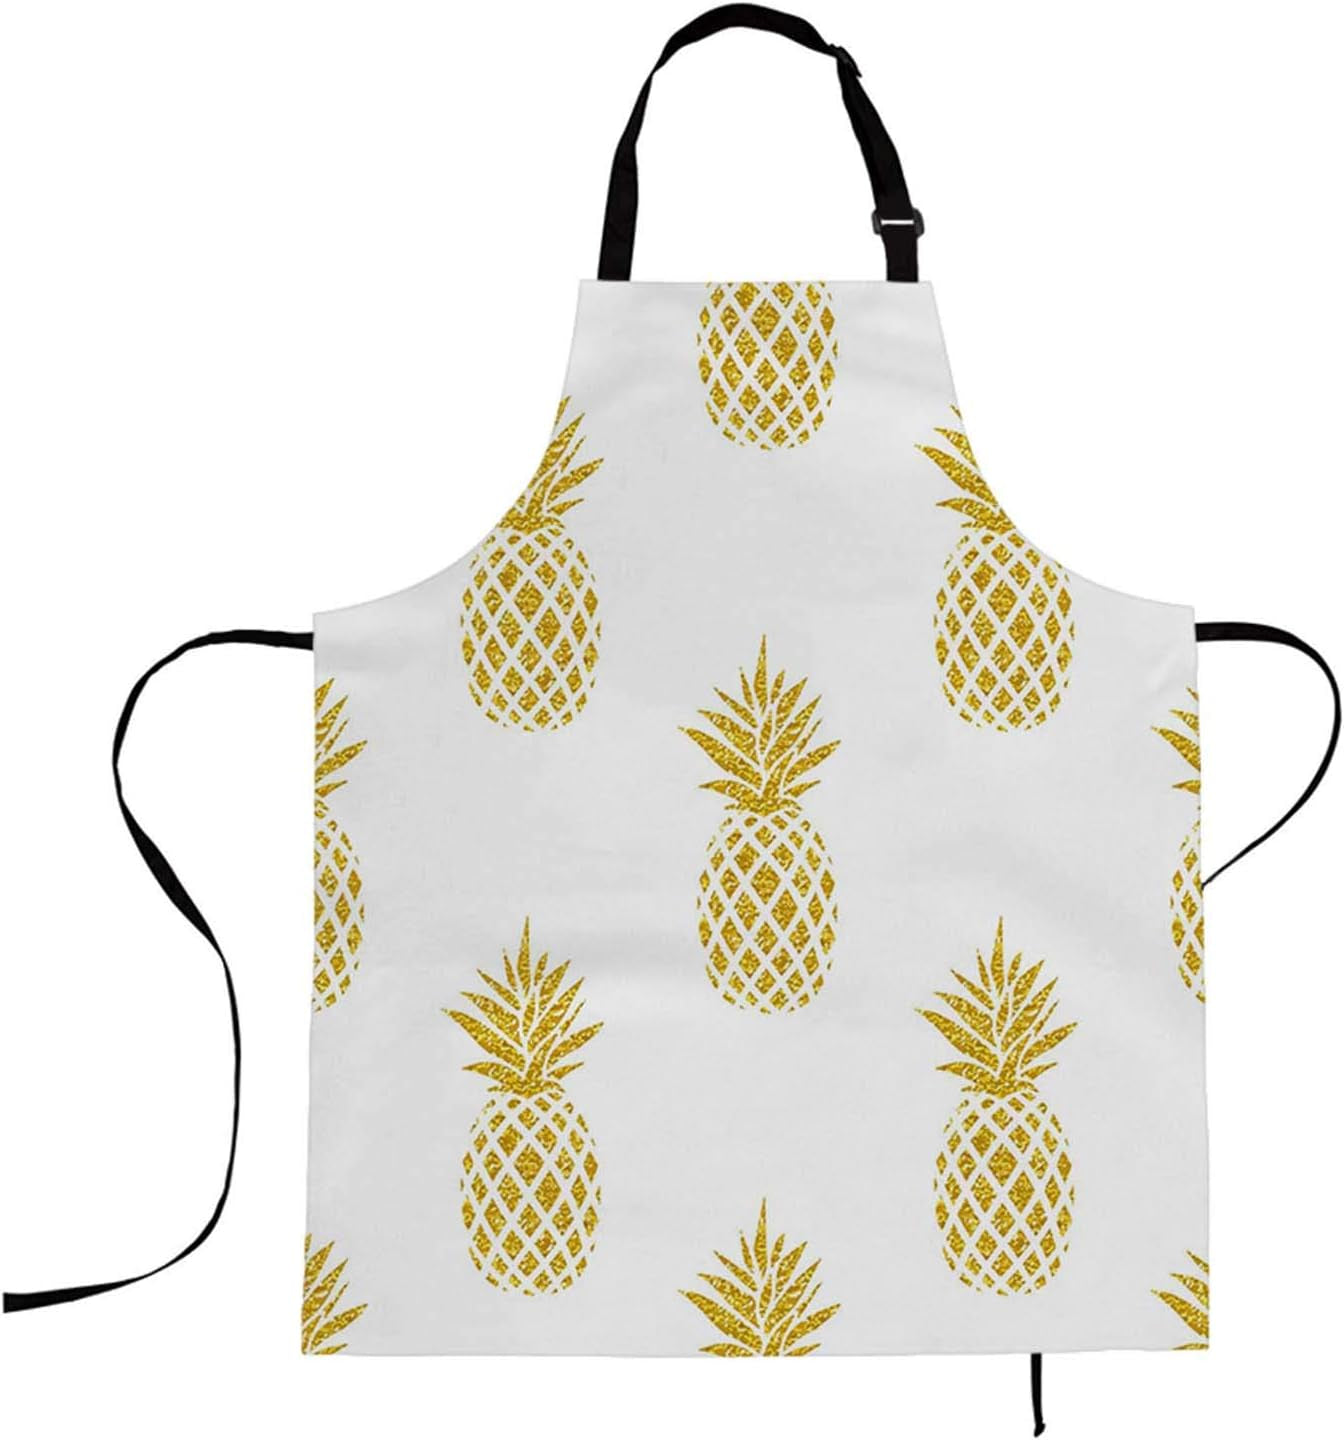 Aprons Pineapple Apron Seamless Summer Gold Pineapple on White Kitchen Bib with Adjustable Neck for Cooking Gardening,Adult Size